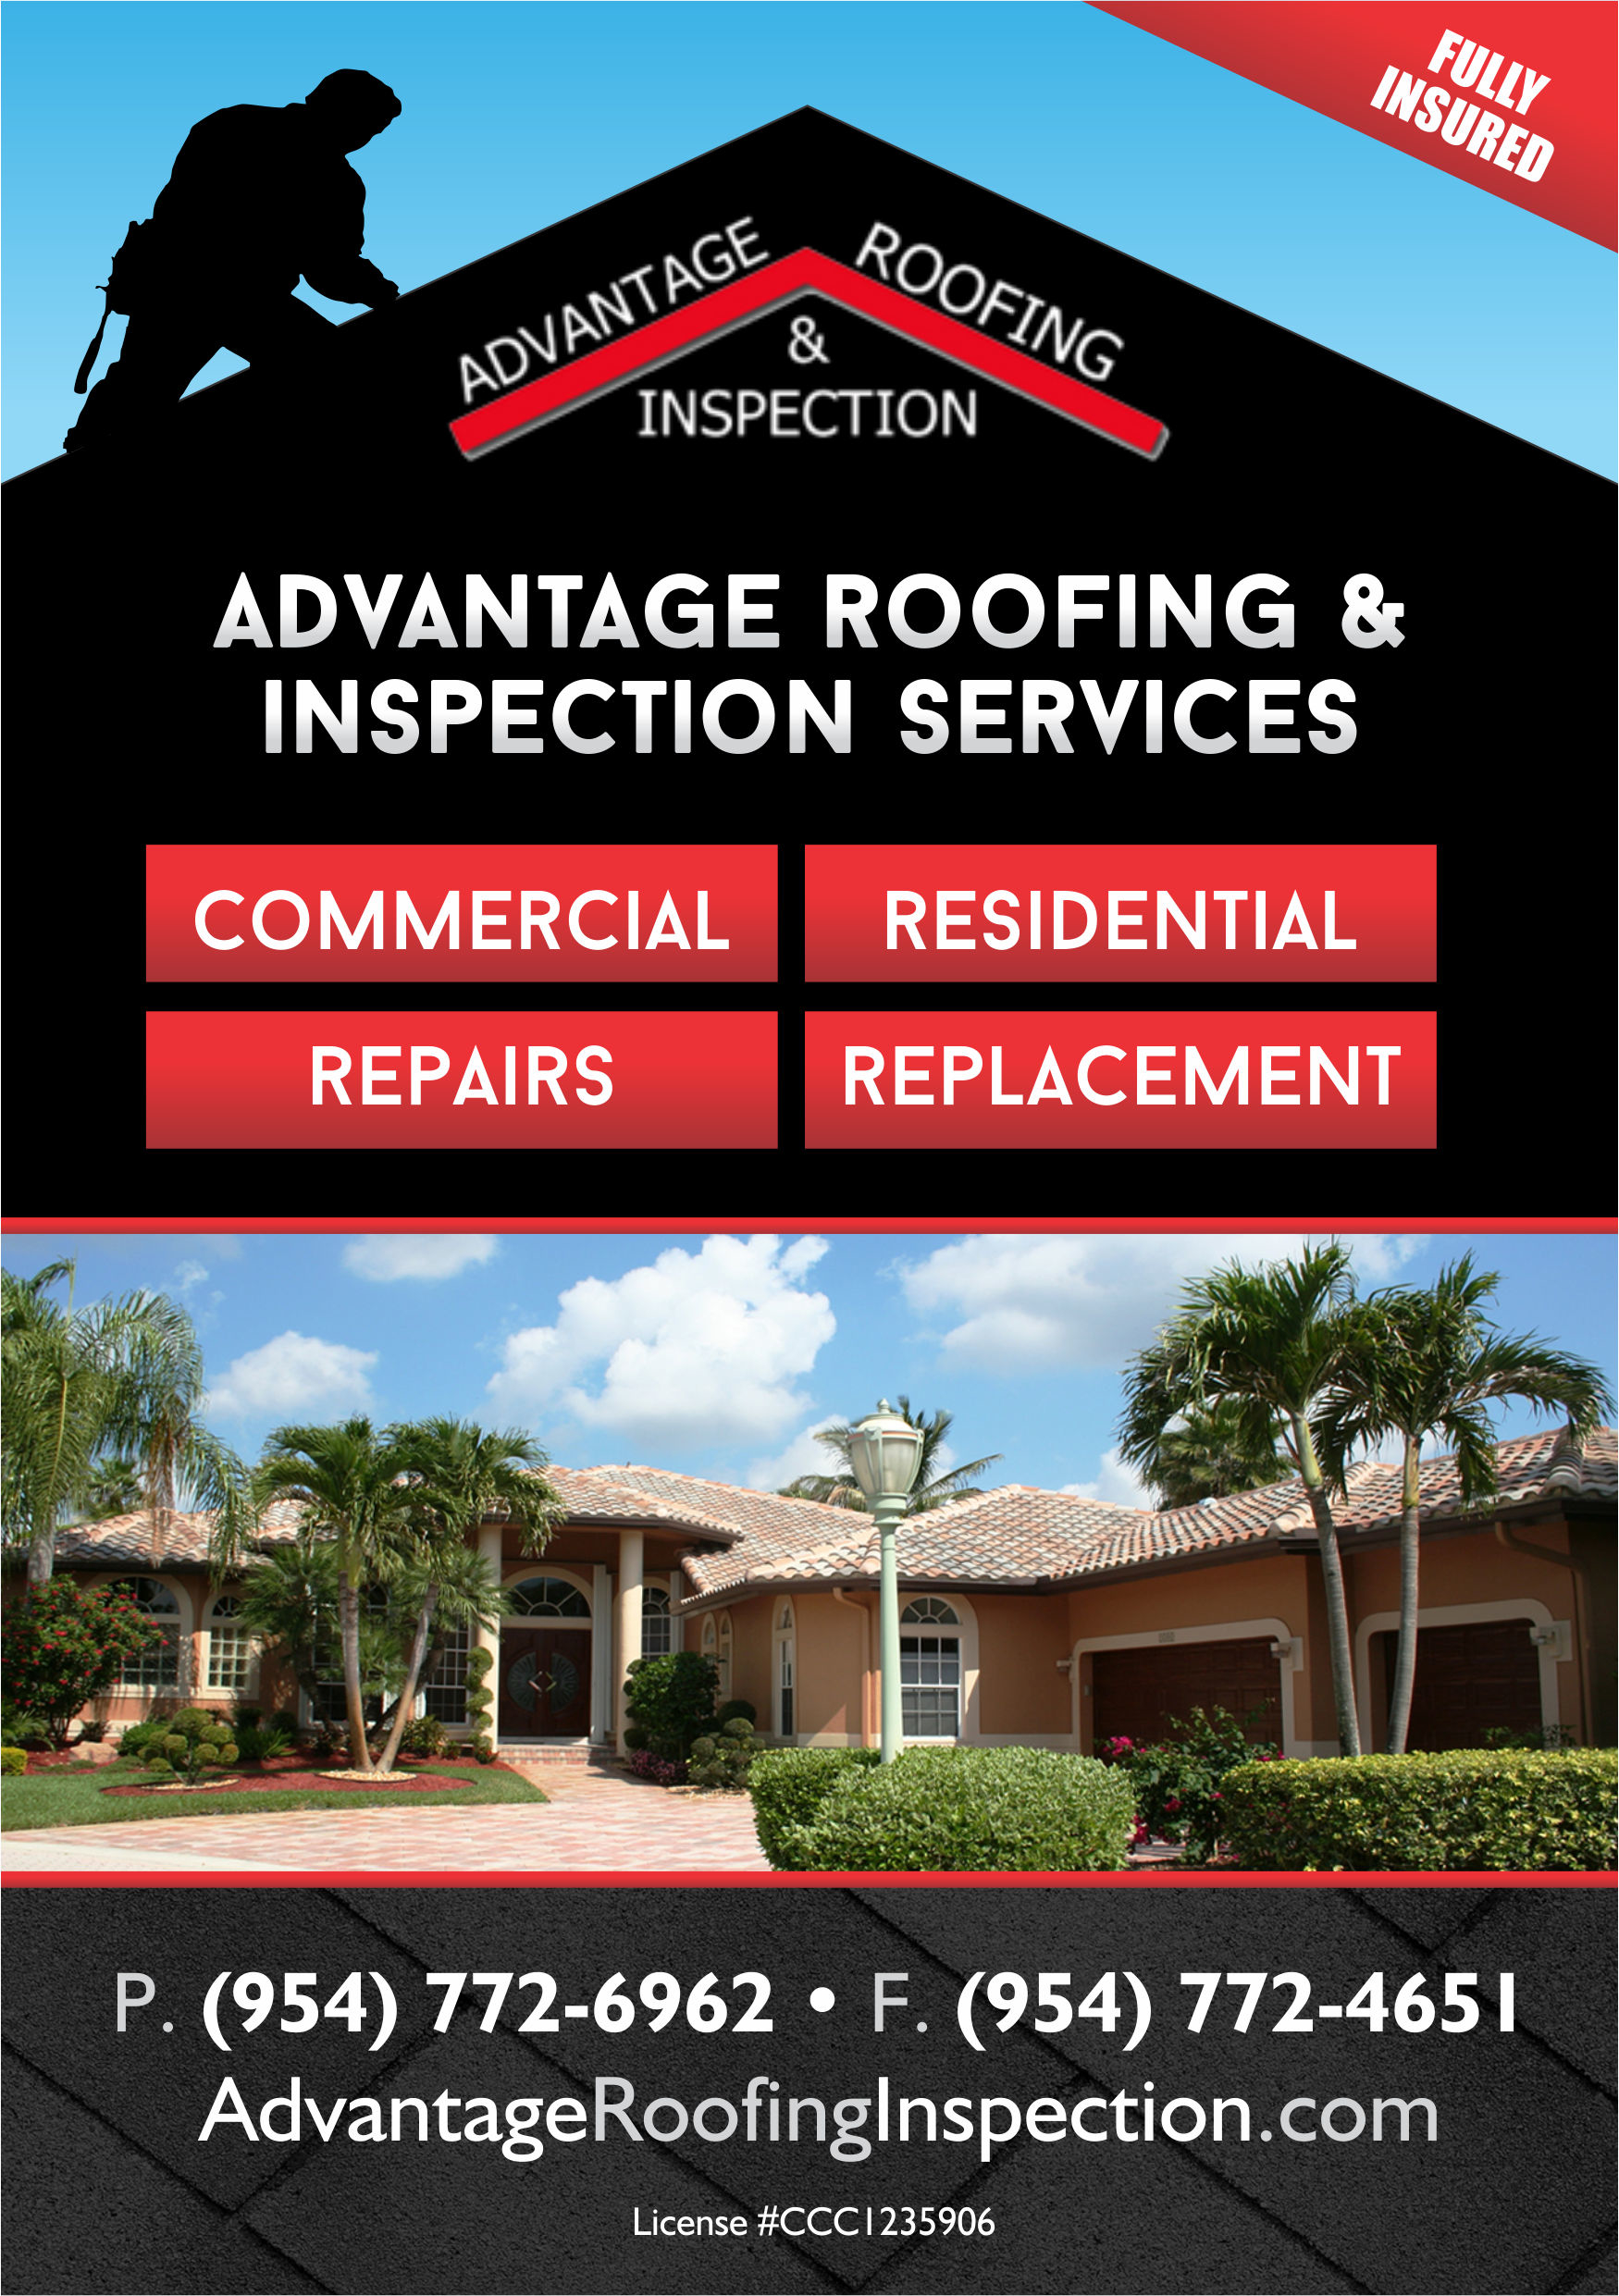 Advantage Roofing & Inspection Inc. Photo